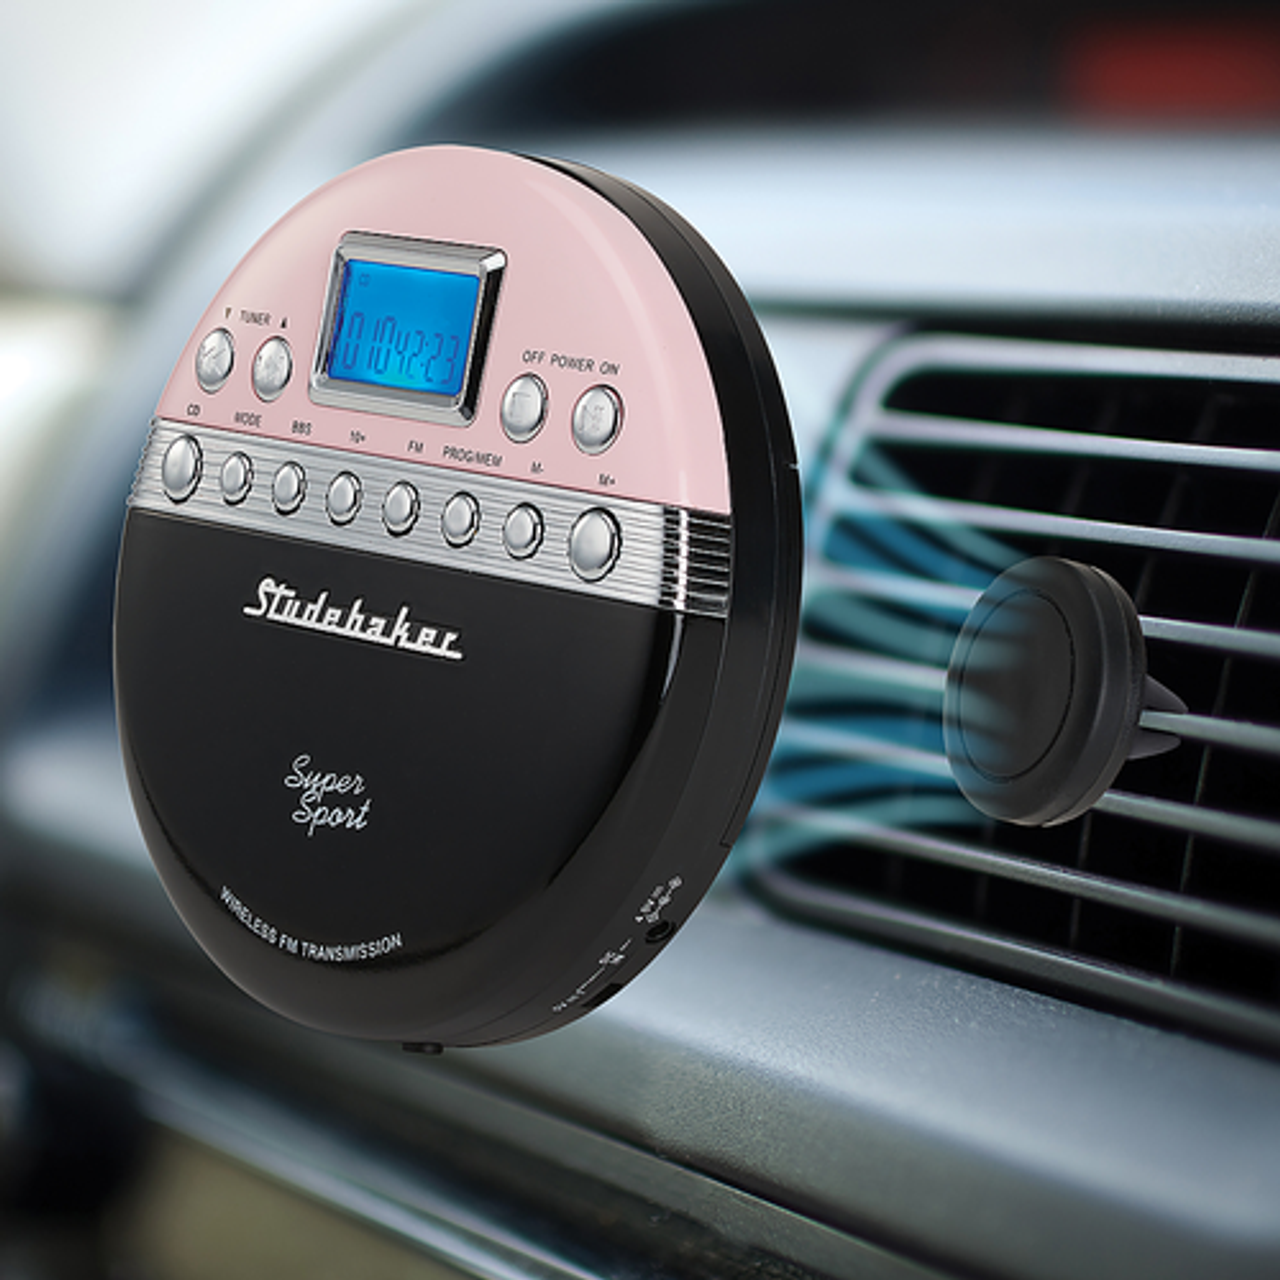 Studebaker - Joggable Personal CD Player with Wireless FM Transmission and FM PLL Radio - Pink/Black